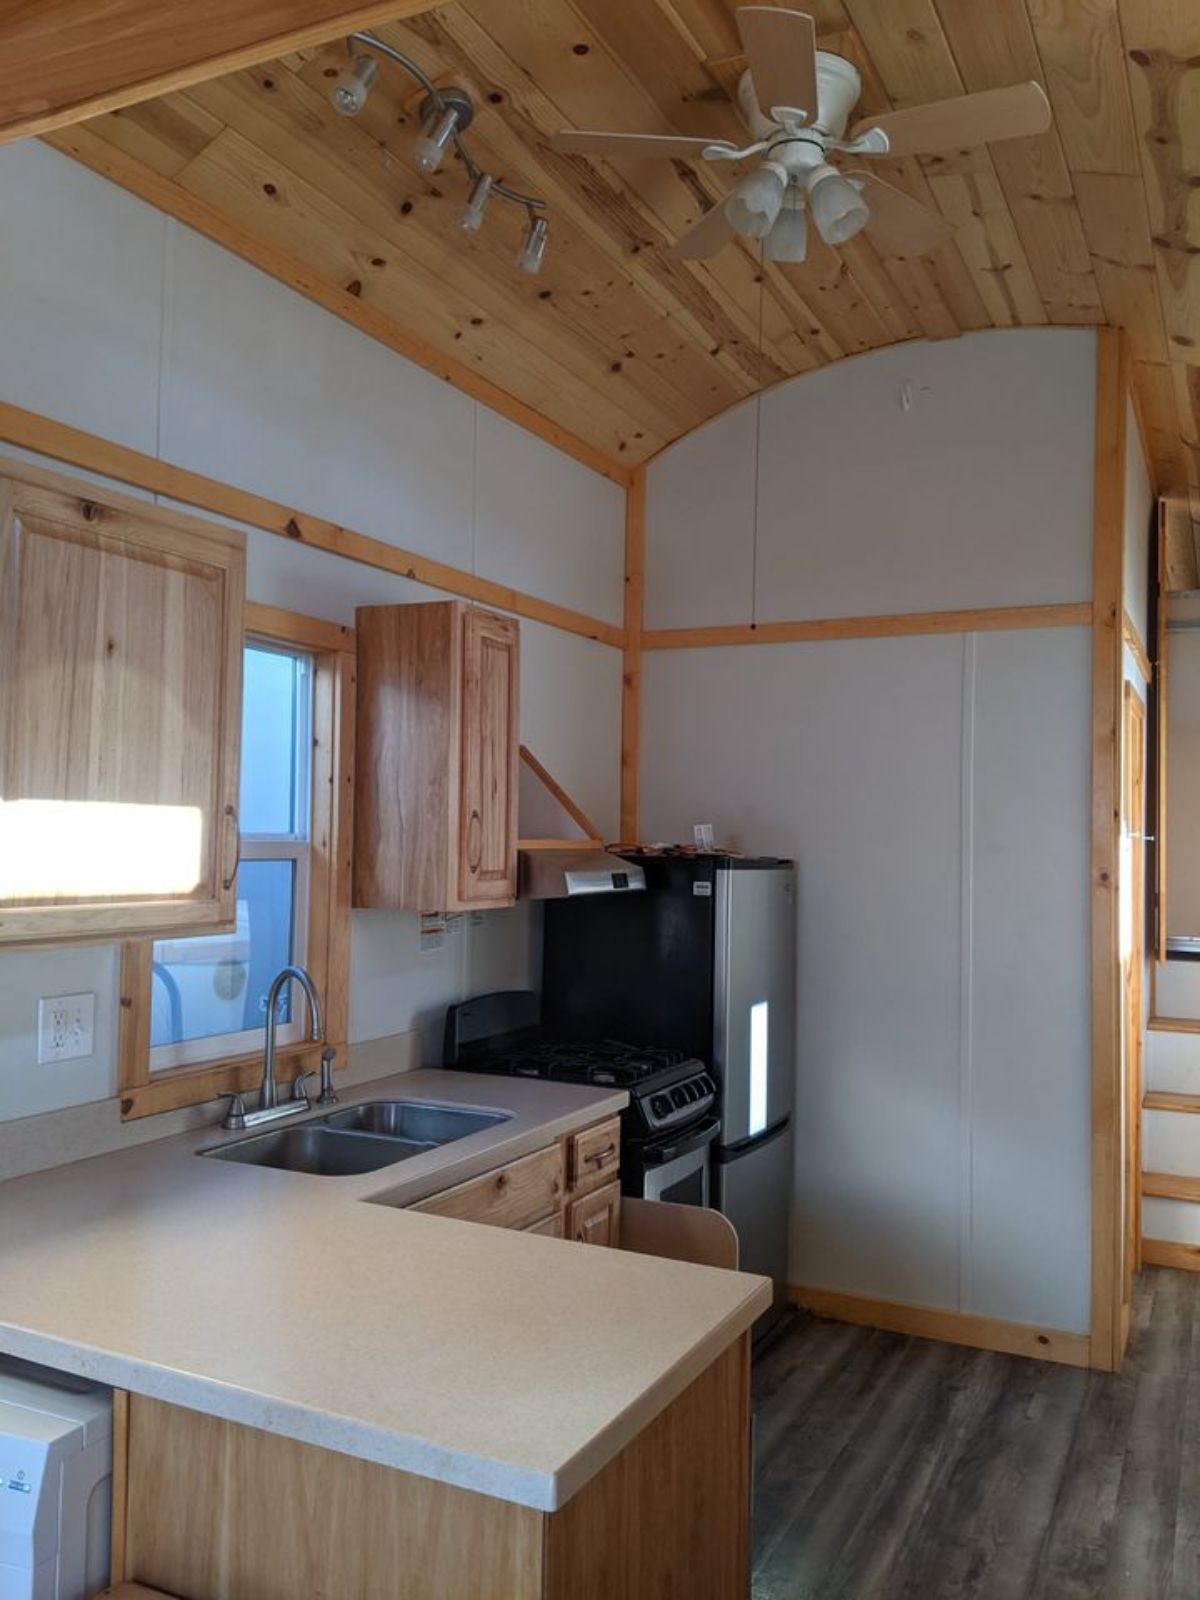 Kitchen area with gas burner, kitchen cabinets and refrigerator with ample space in 35' Spacious Tiny House